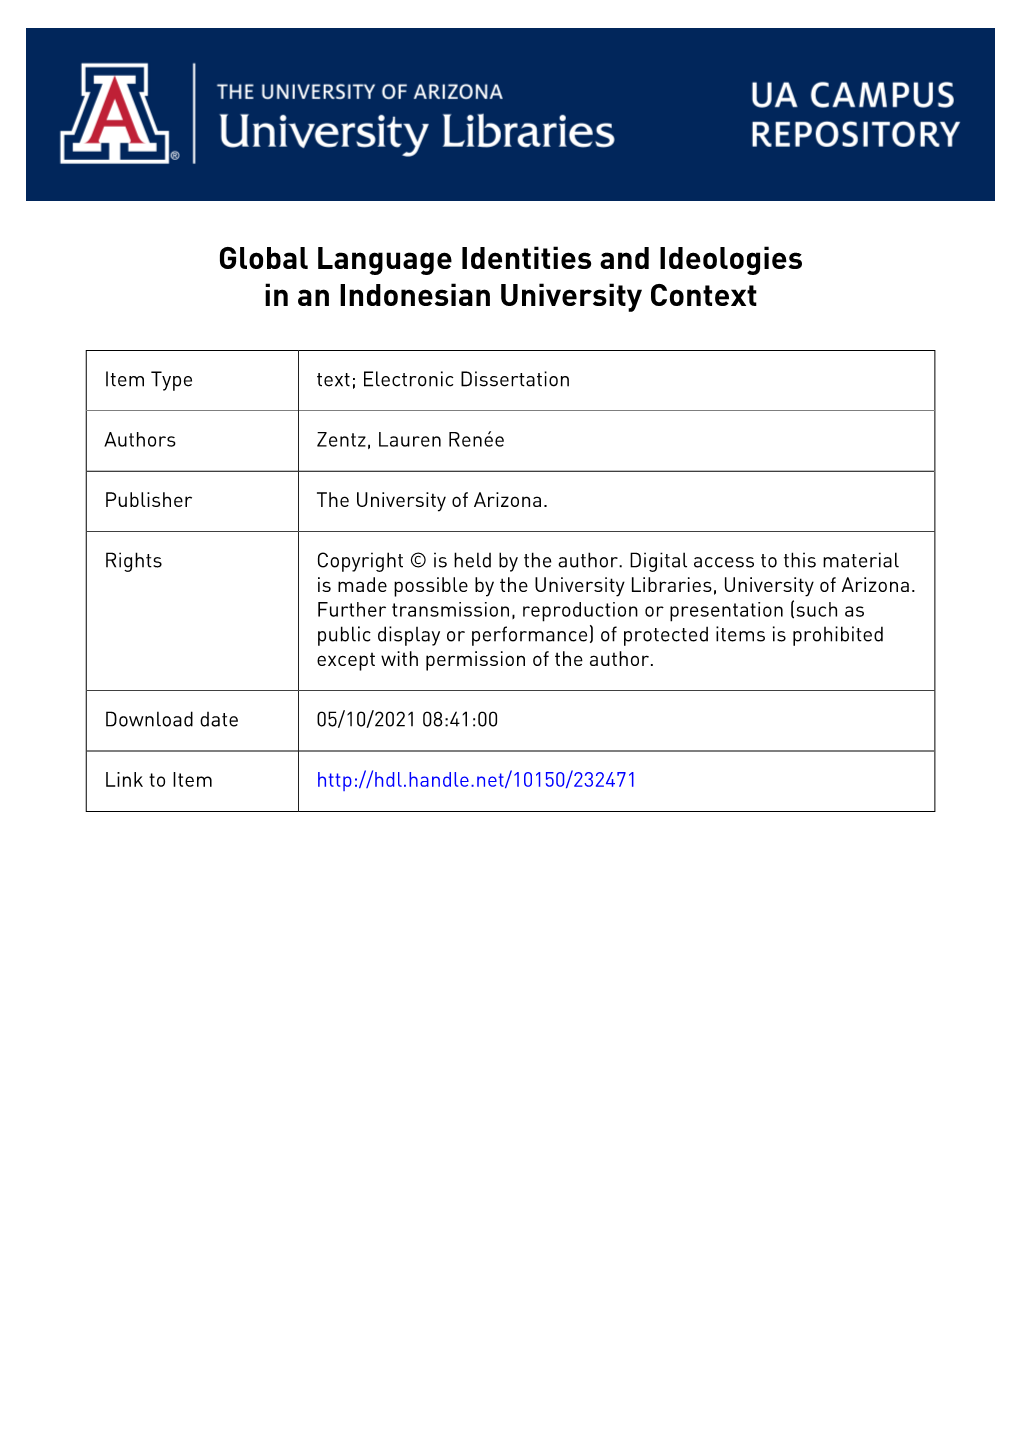 Global Language Identities and Ideologies in an Indonesian University Context